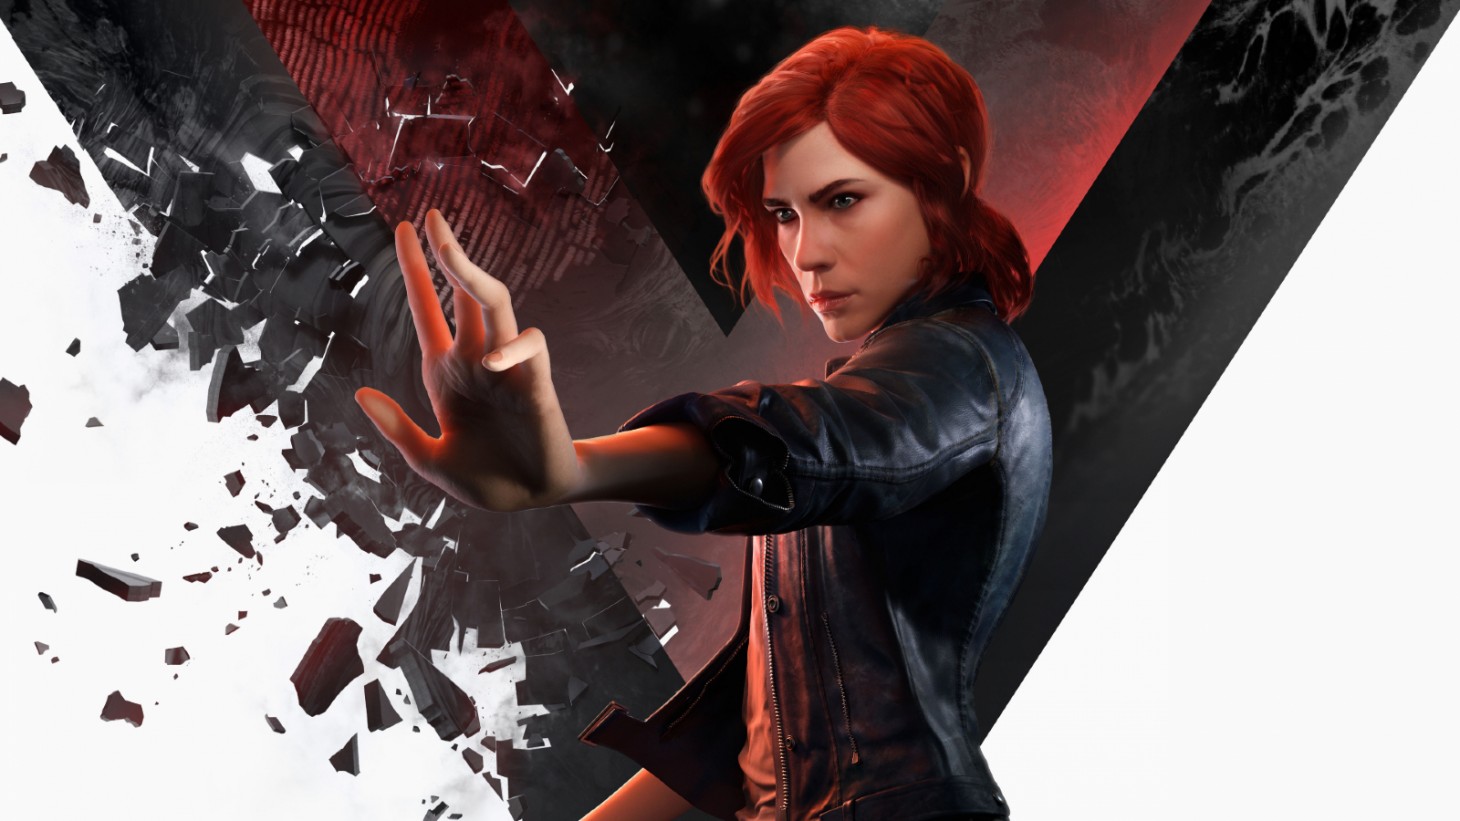 Remedy Entertainment Acquires Full Rights To Control Franchise From 505 Games For $18 Million